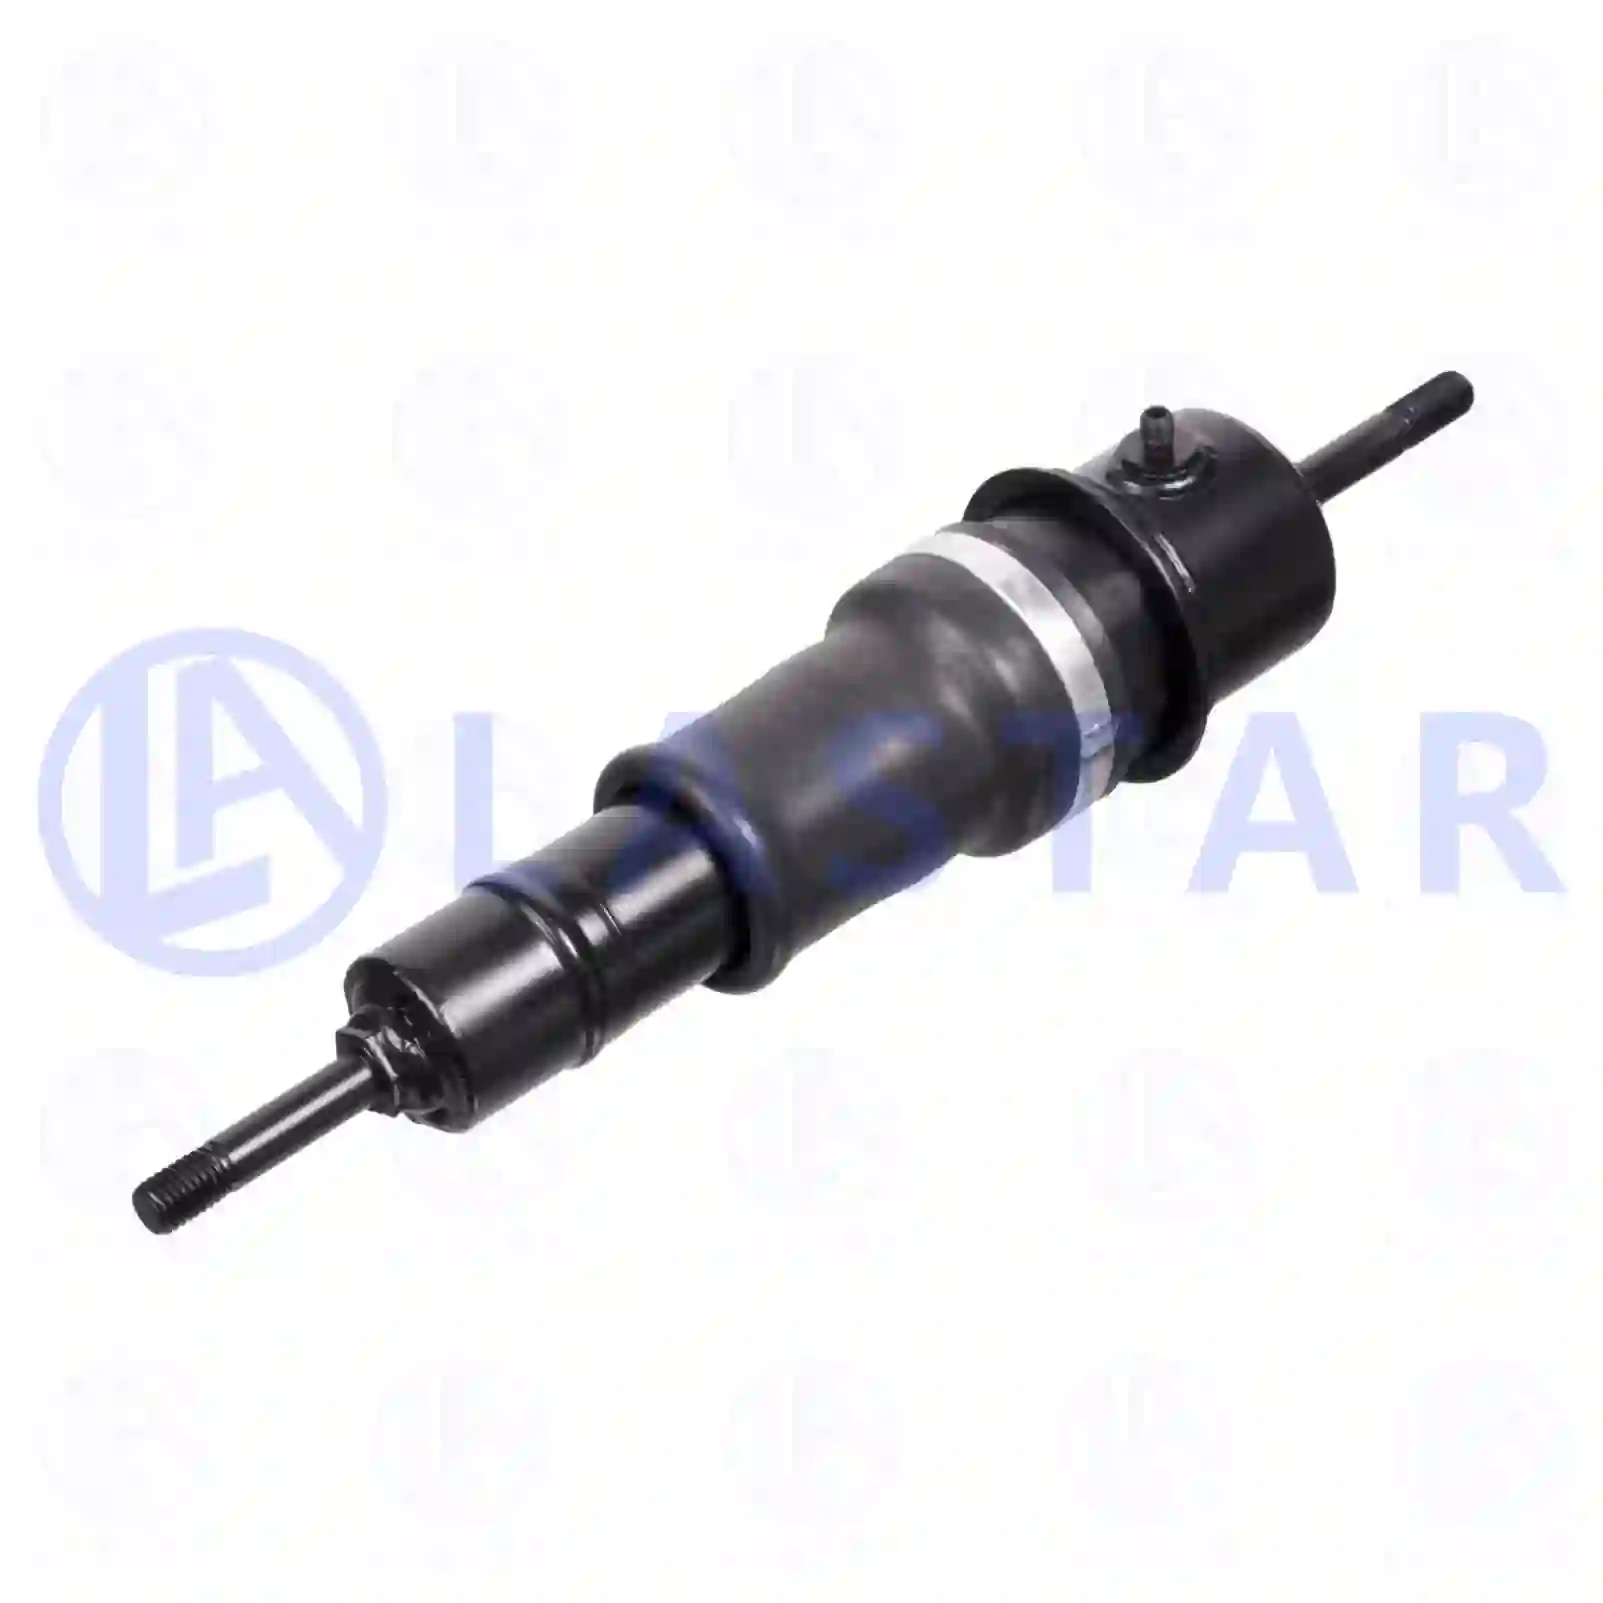 Cabin shock absorber, 77734736, 1089728, 1593843, 1594089, , ||  77734736 Lastar Spare Part | Truck Spare Parts, Auotomotive Spare Parts Cabin shock absorber, 77734736, 1089728, 1593843, 1594089, , ||  77734736 Lastar Spare Part | Truck Spare Parts, Auotomotive Spare Parts